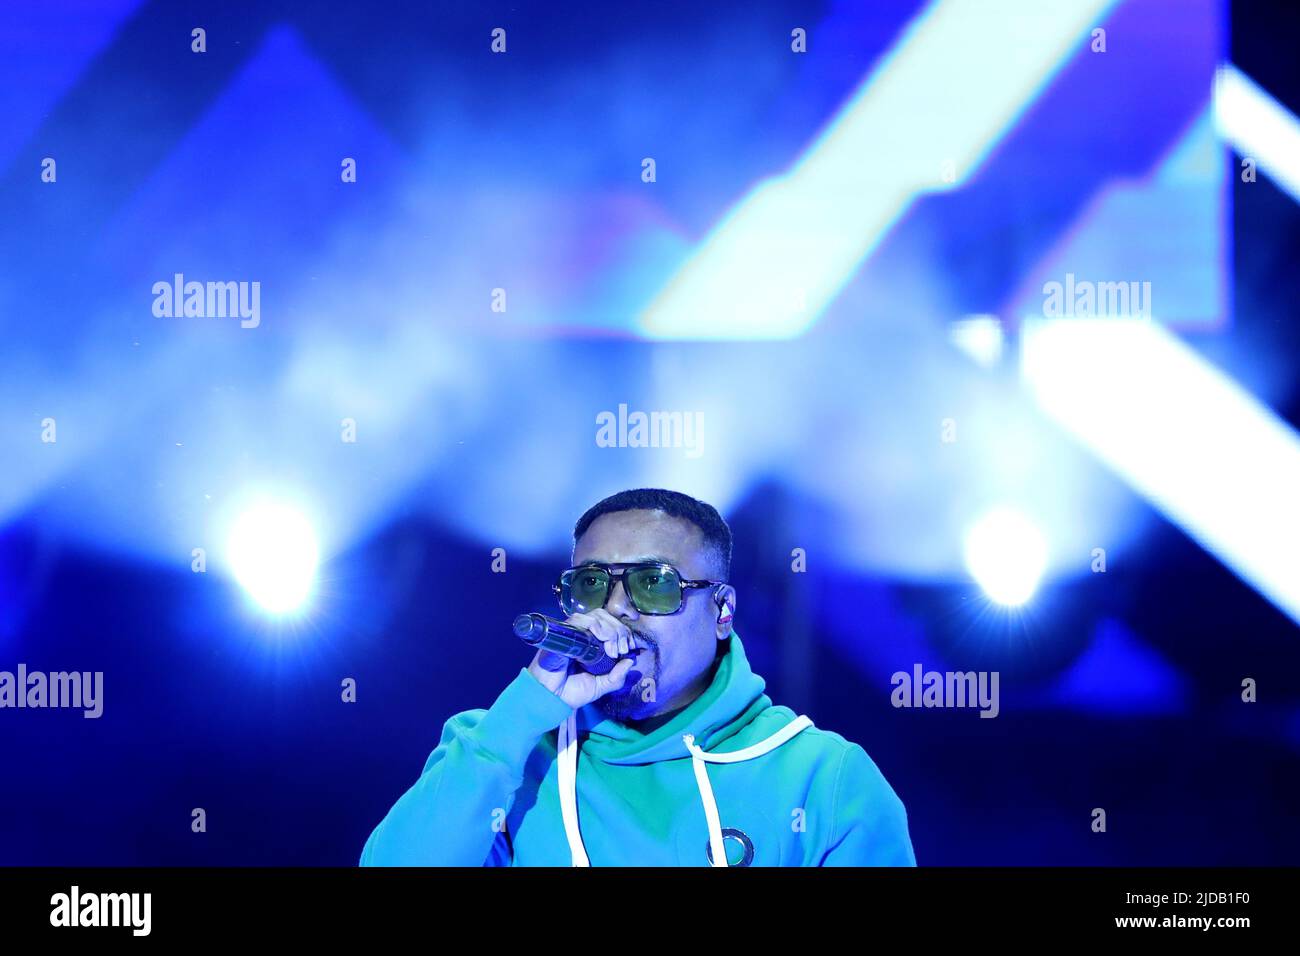 June 19, 2022, Lisbon, Portugal: Apl.de.ap of US band Black Eyed Peas performs during the Rock in Rio Lisboa 2022 music festival in Lisbon, Portugal, on June 19, 2022. (Credit Image: © Pedro Fiuza/ZUMA Press Wire) Stock Photo